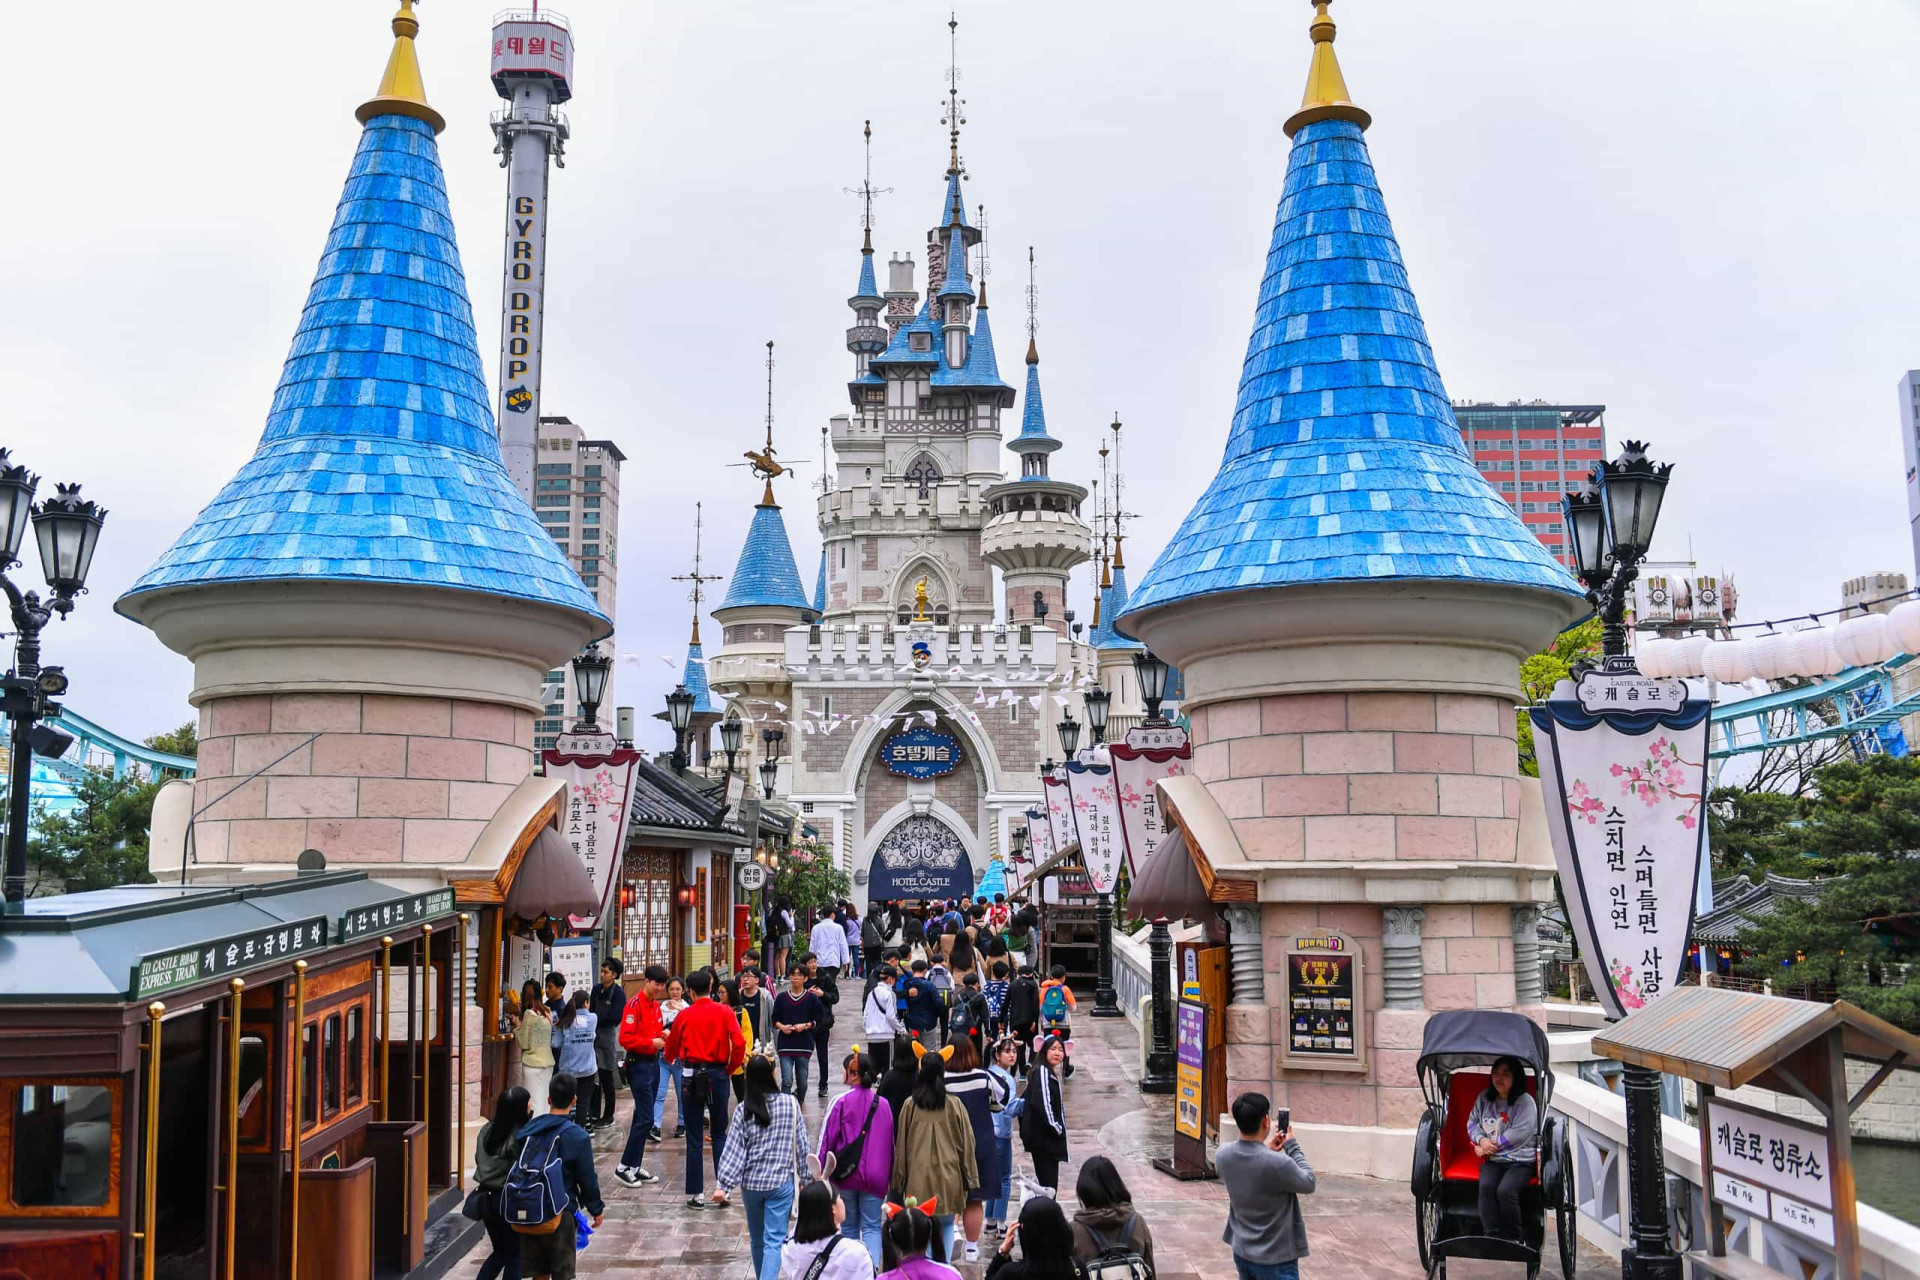 <p>Safe, clean, and walkable, Seoul has abundant parks and two major theme parks —Lotte World and Everland. Public transport is very easy to use with kids, and the whole family can enjoy local activities such as Karaoke singing and visiting a bathhouse. </p>